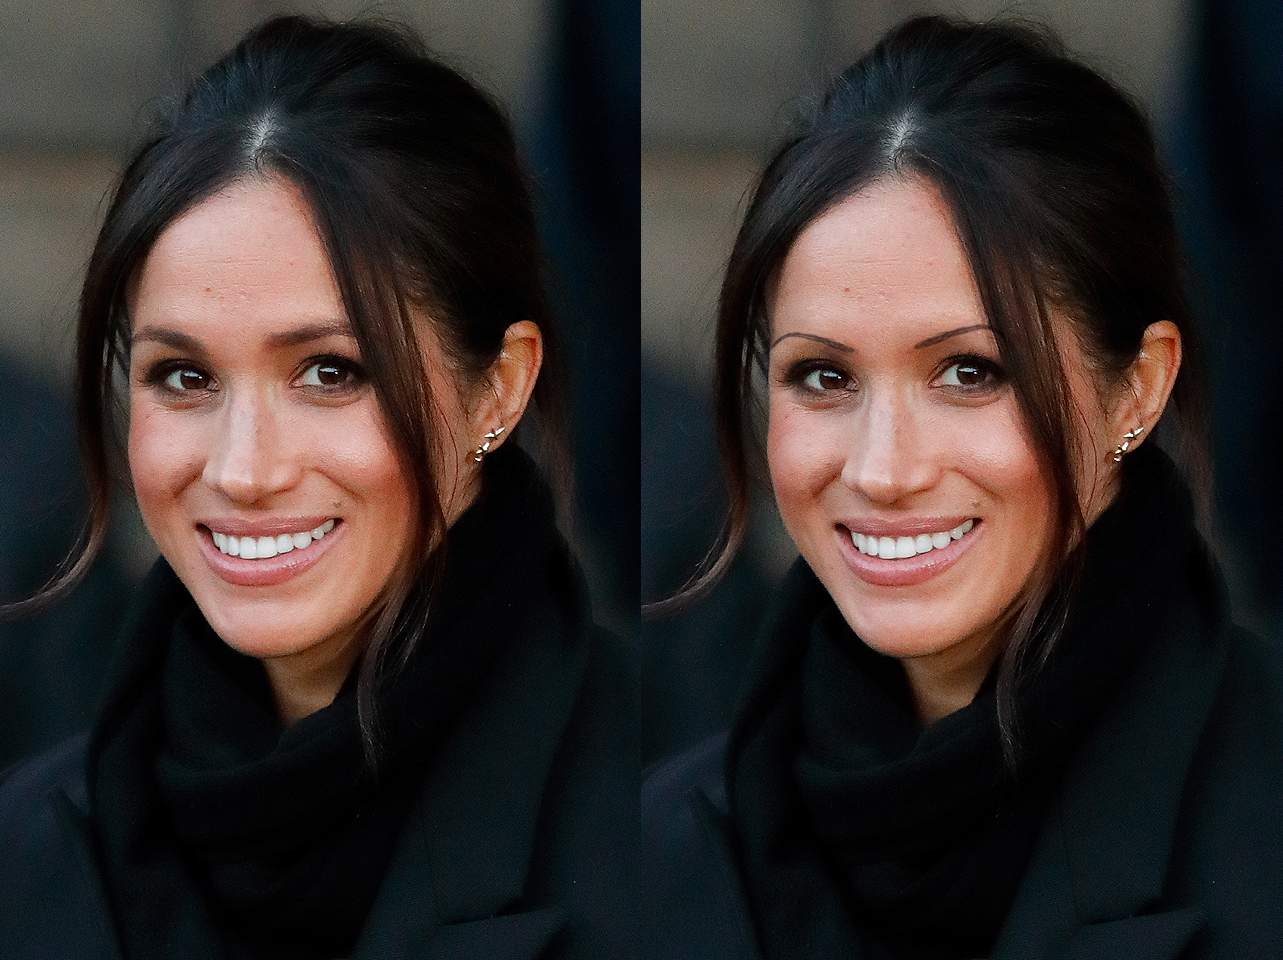 Meghan Markle's signature brows from 2018 vs digitally edited thin-brow look | Source: Getty Images